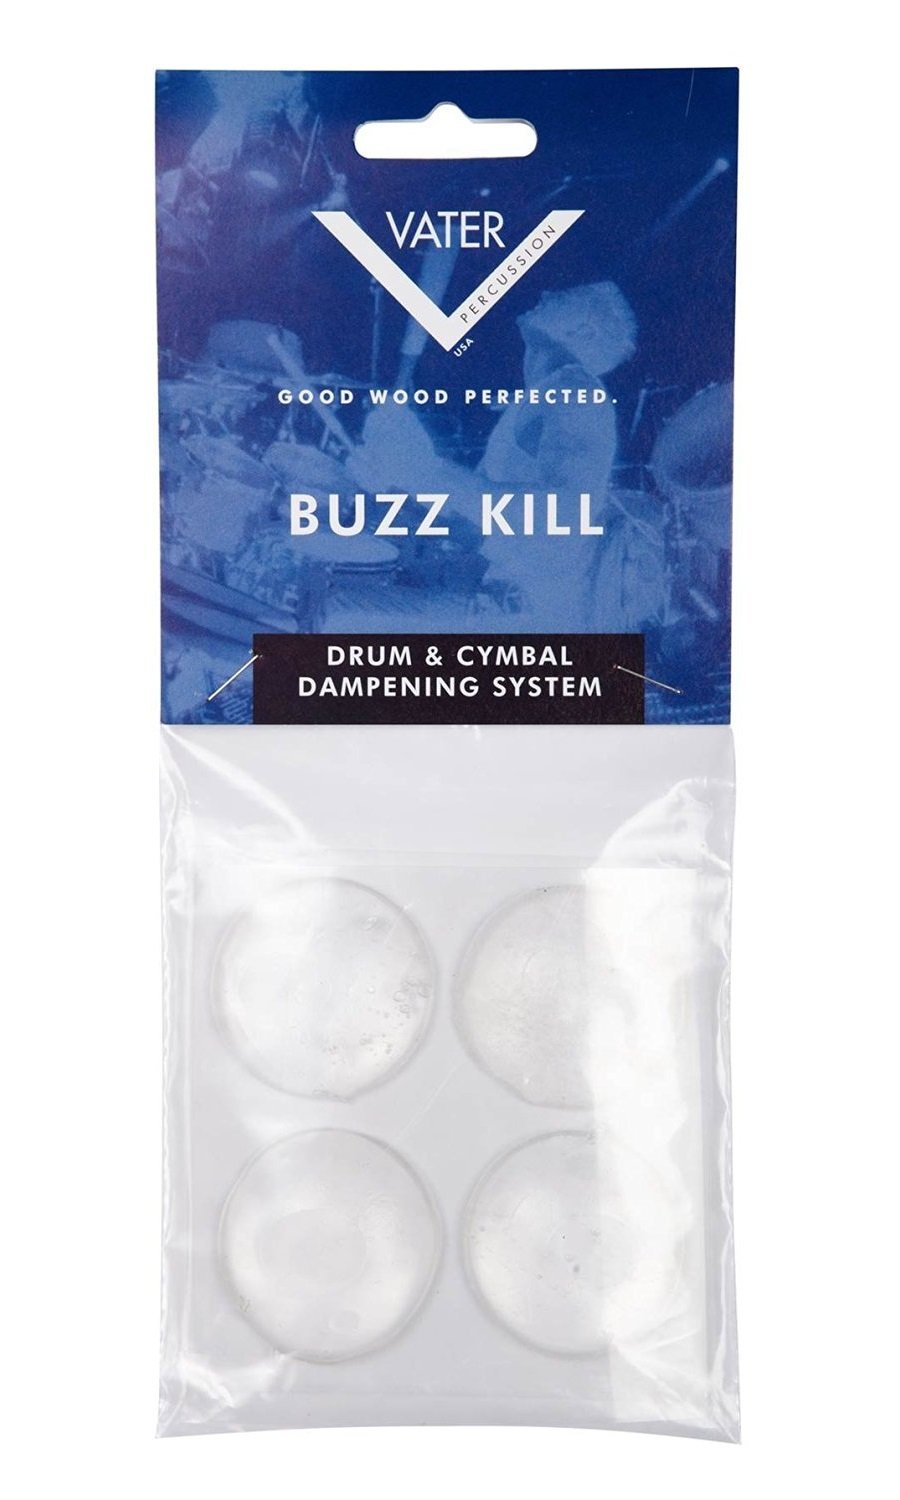 Vater Buzz Kill Extra Dry Drum Dampening Gels, 4-Pack Buzz Kill Extra Dry Gels